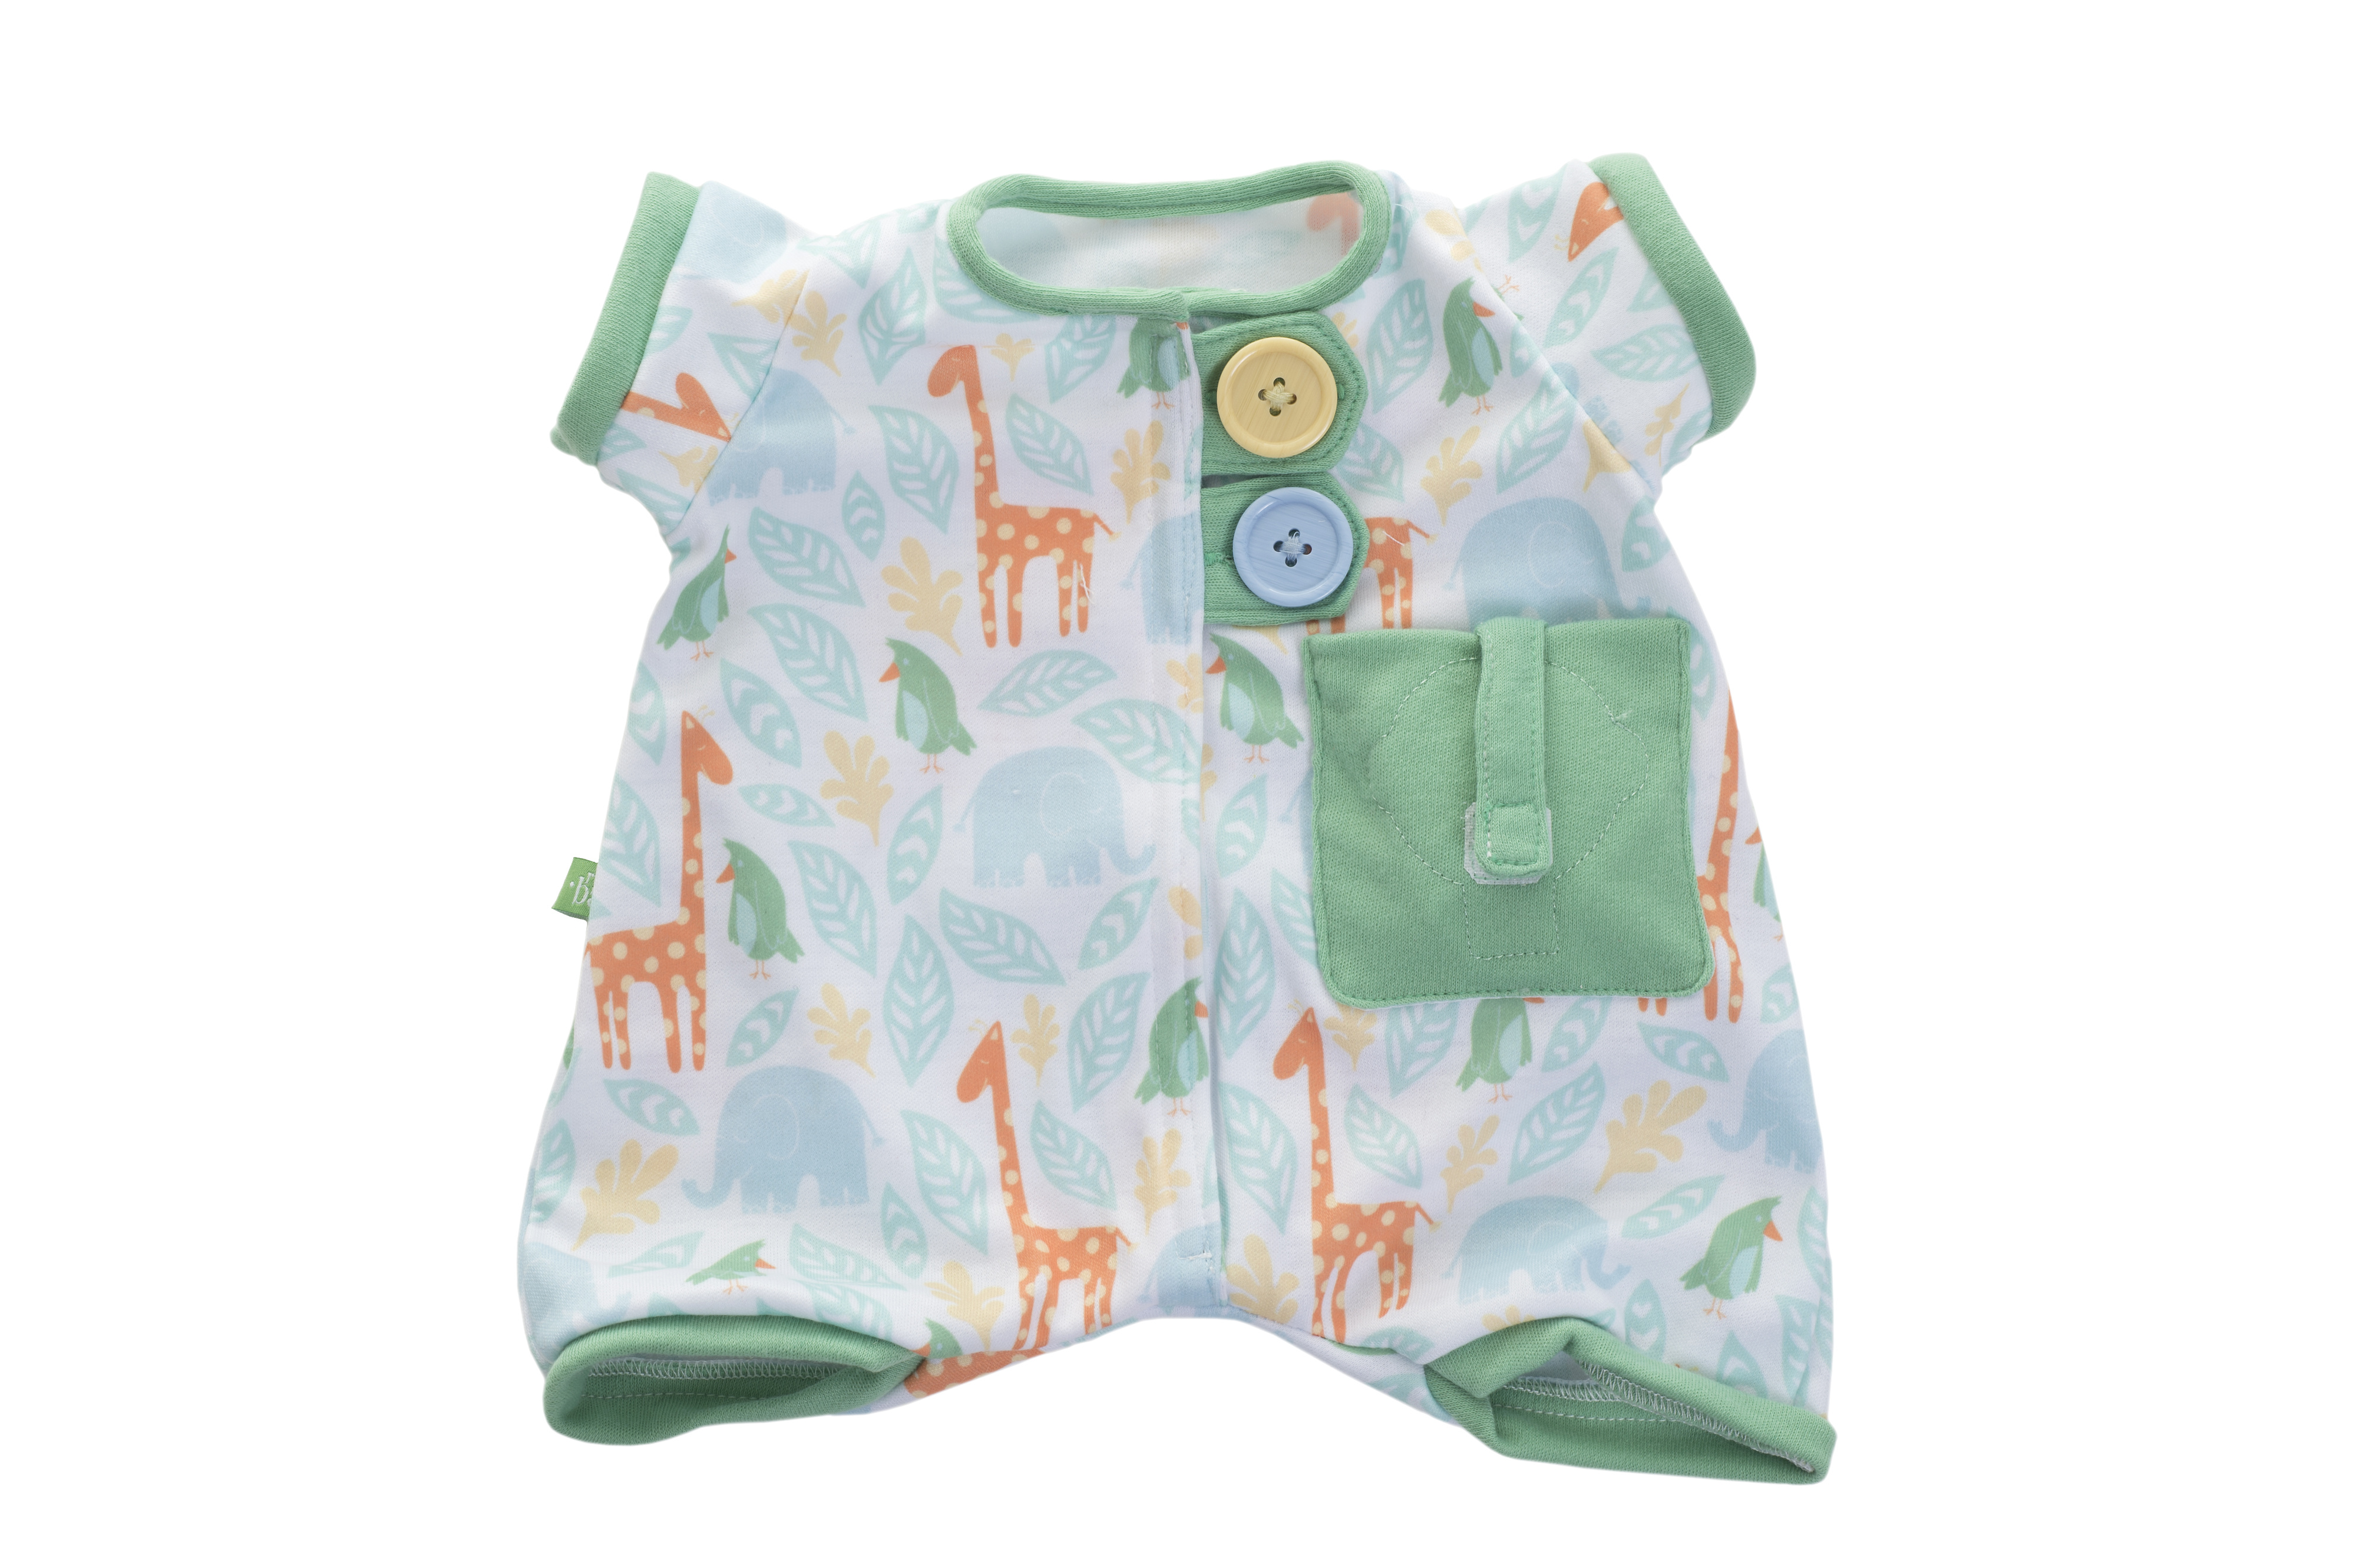 Outlet rubens barn puppenkleidung green pyjama baby